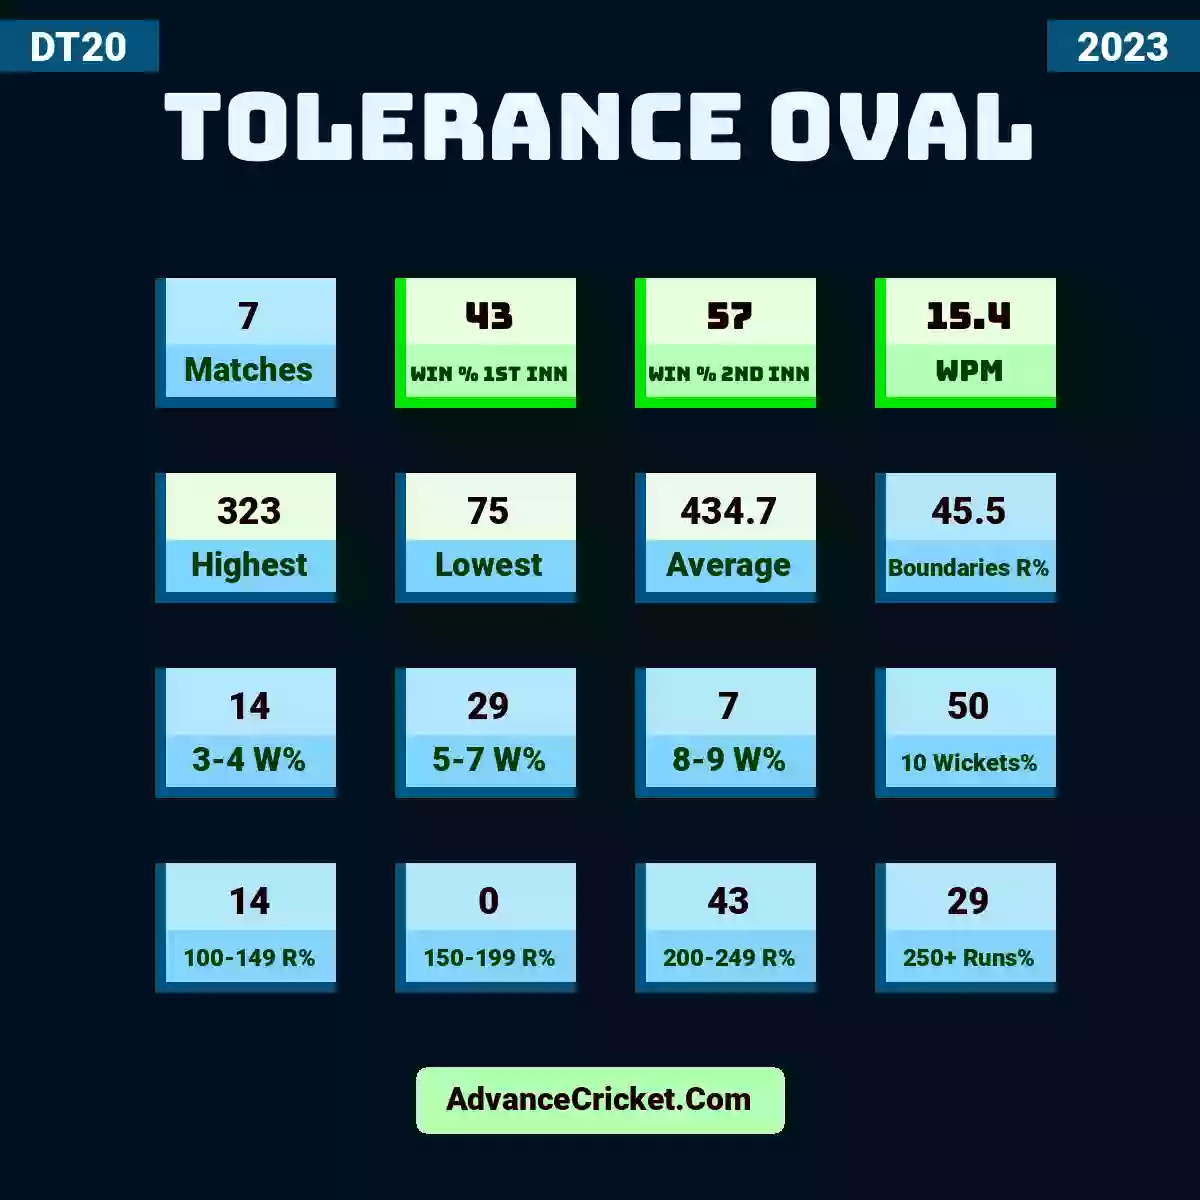 Image showing Tolerance Oval with Matches: 7, Win % 1st Inn: 43, Win % 2nd Inn: 57, WPM: 15.4, Highest: 323, Lowest: 75, Average: 434.7, Boundaries R%: 45.5, 3-4 W%: 14, 5-7 W%: 29, 8-9 W%: 7, 10 Wickets%: 50, 100-149 R%: 14, 150-199 R%: 0, 200-249 R%: 43, 250+ Runs%: 29.